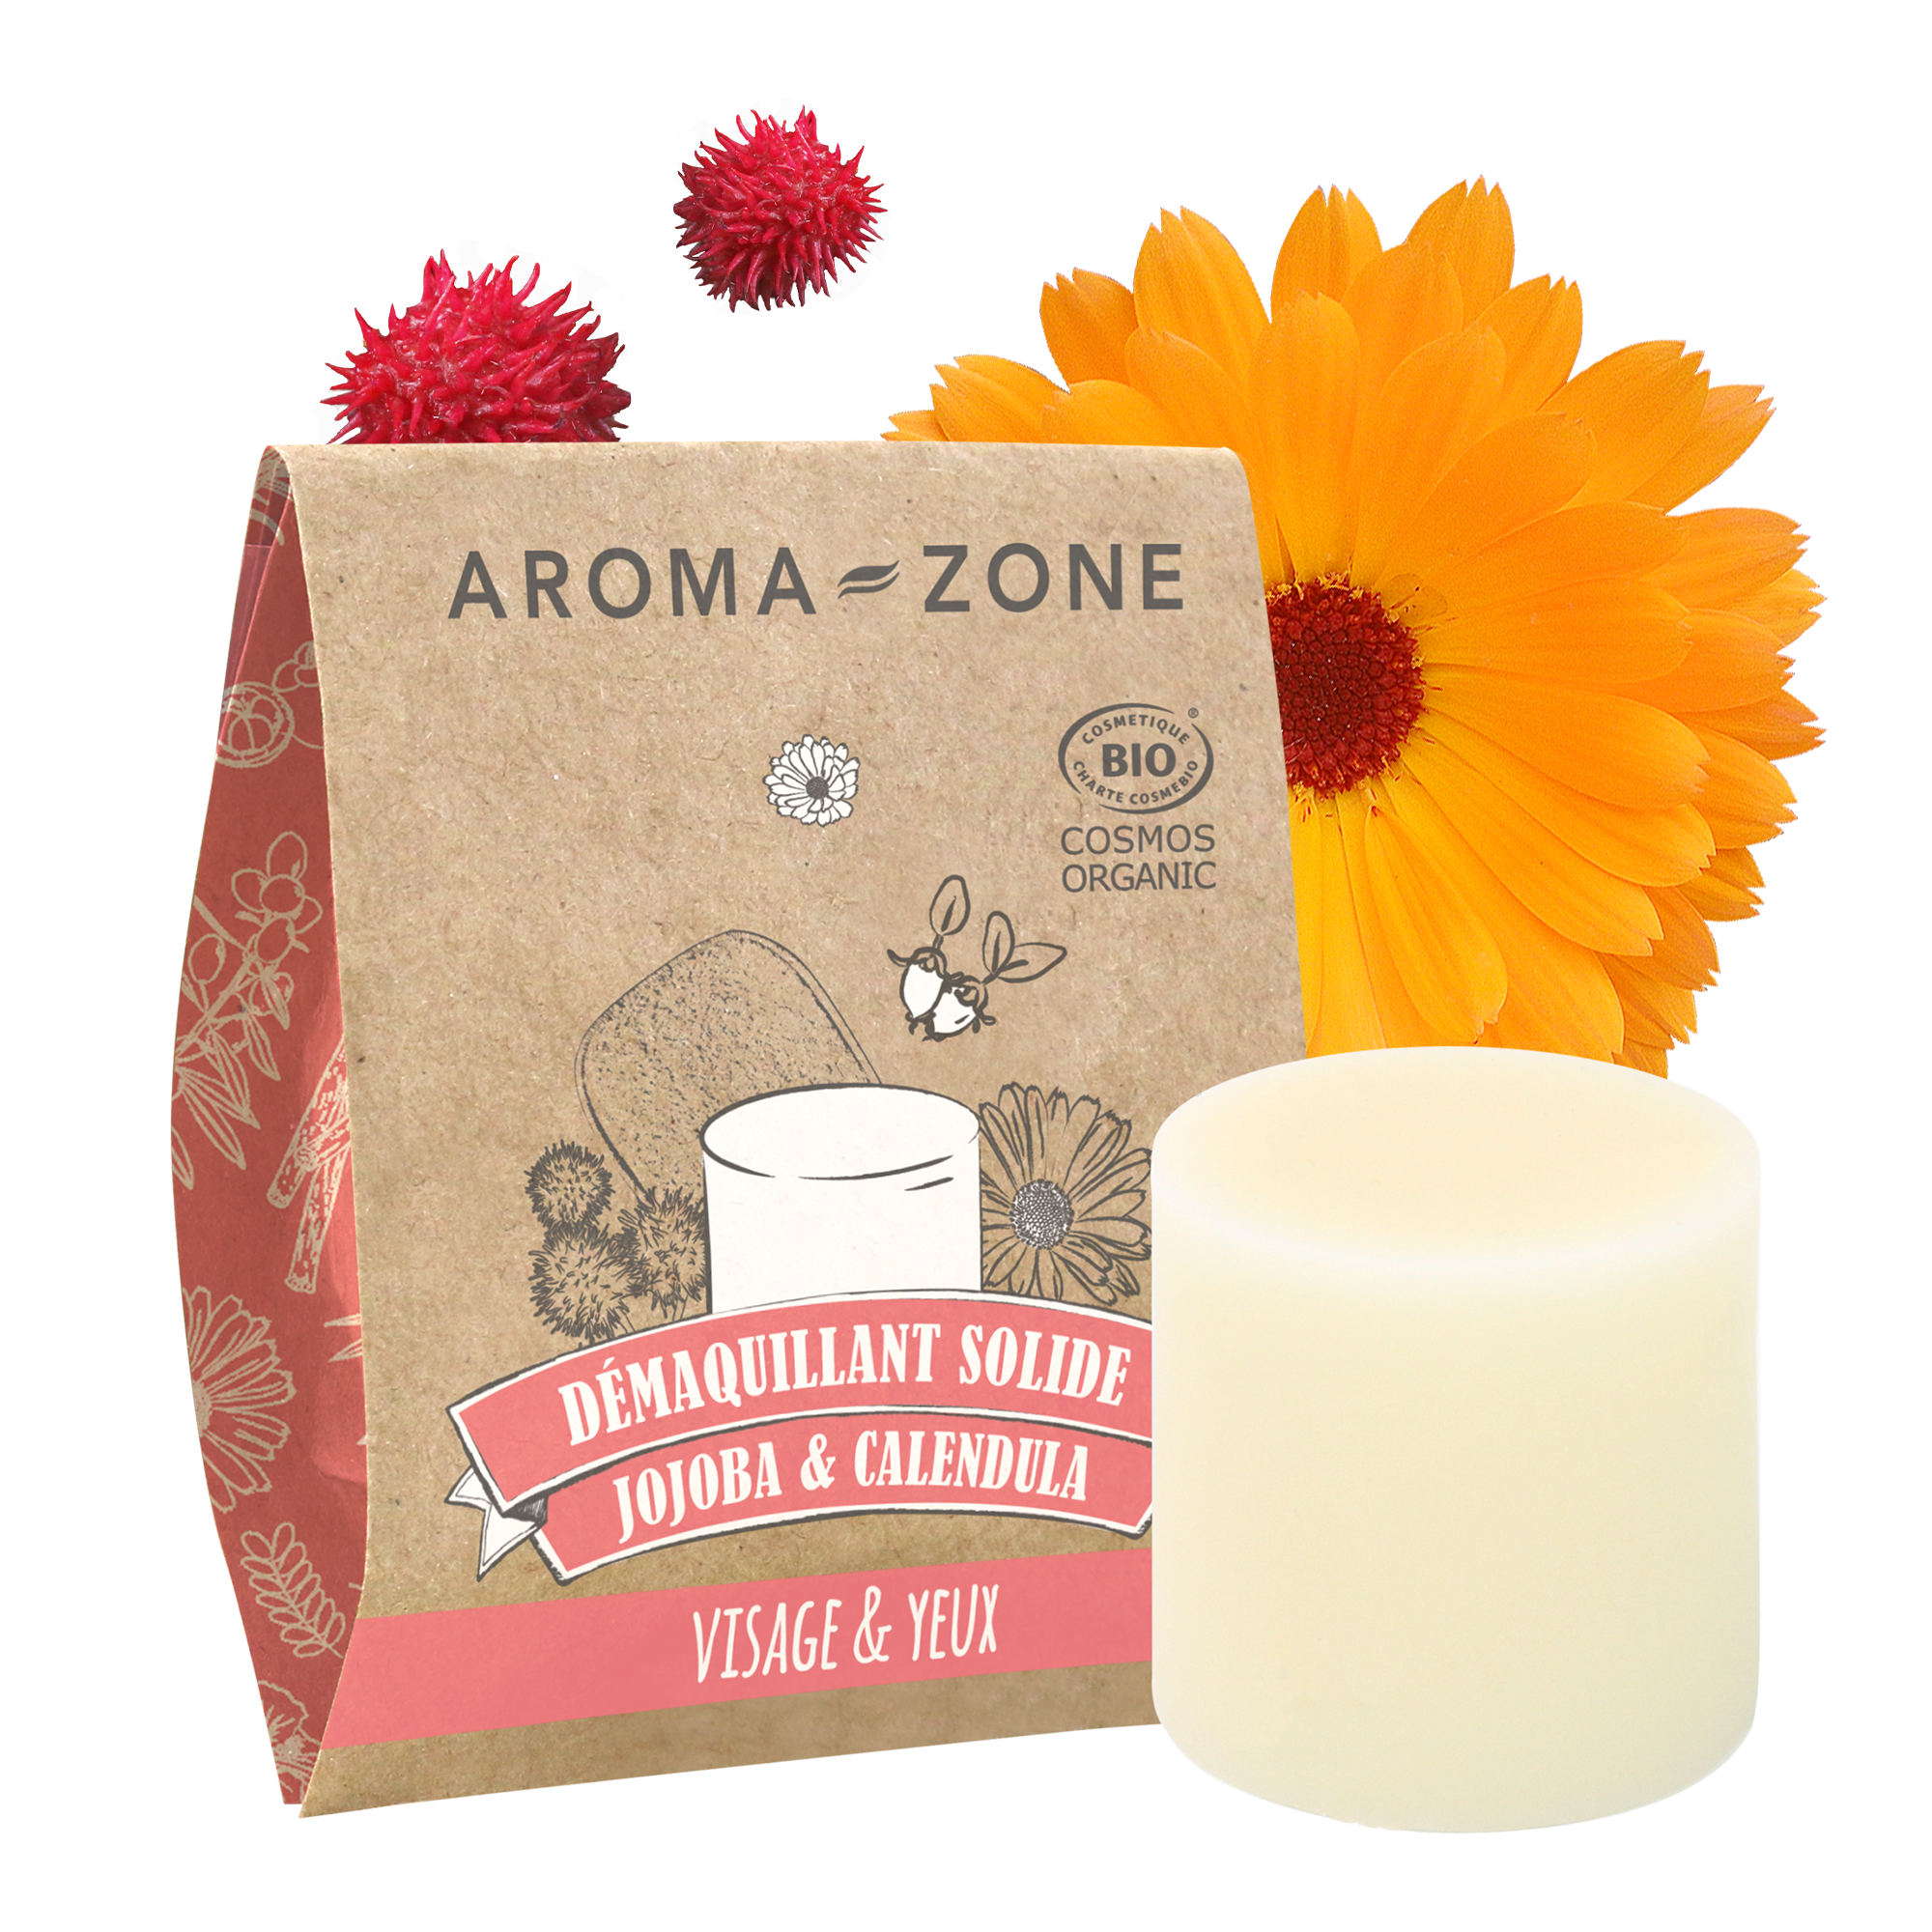 https://cdn.aroma-zone.com/ct/Catalogue_Demaquilla-BXySMgw3.png?twic=v1/output=auto/quality=85/contain=626x723/resize=-x626/resize-max=2000